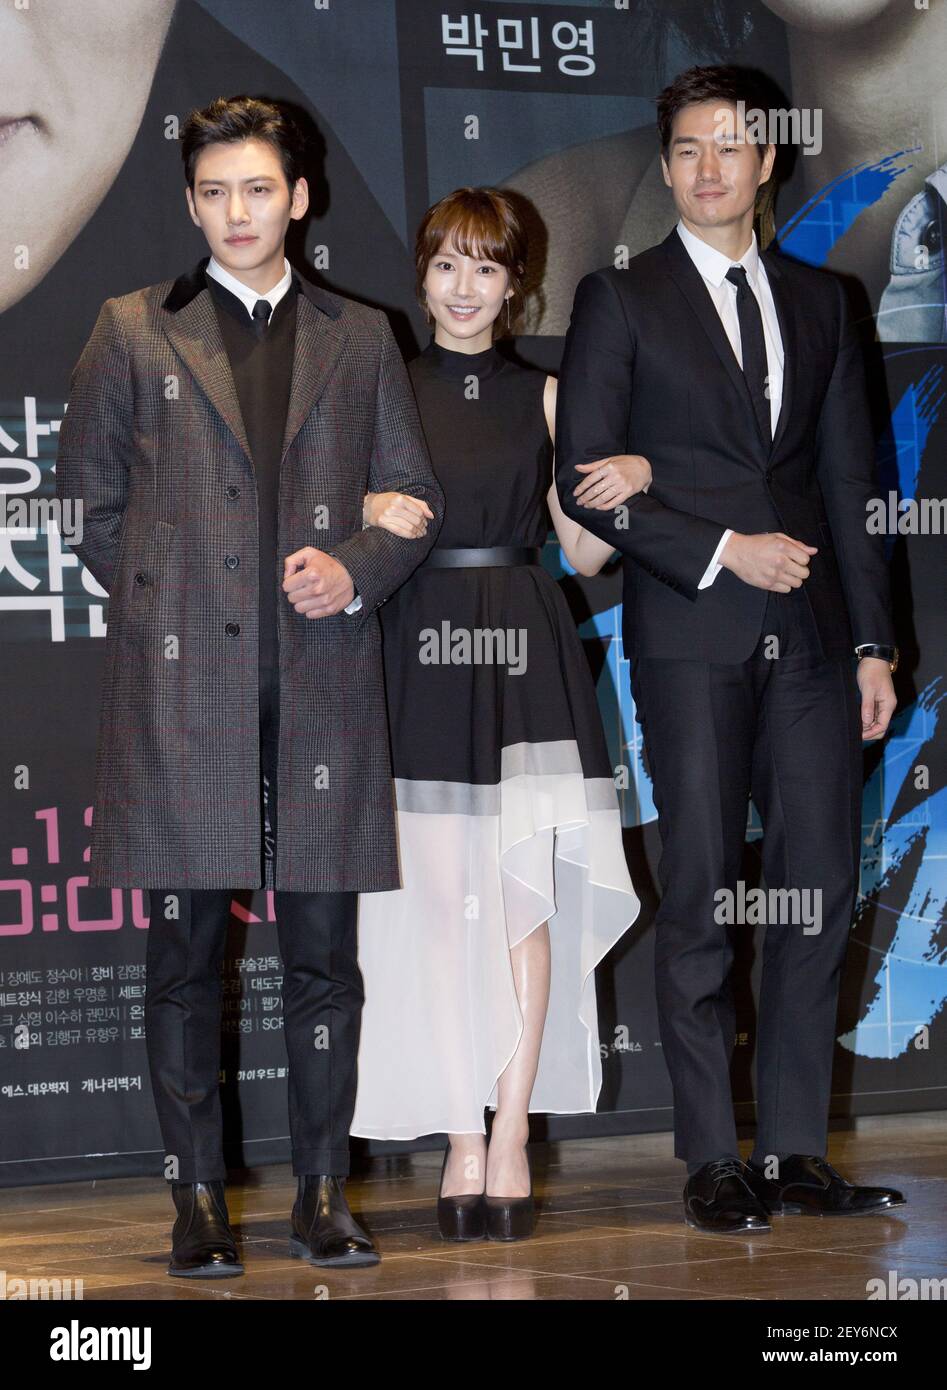 4 December 2014 - Seoul, South Korea : (R to L) South Korean actor Yoo  Ji-tae, actress Park Min-young and actor Ji Chang-wook, attend a photo call  for the KBS TV Monday